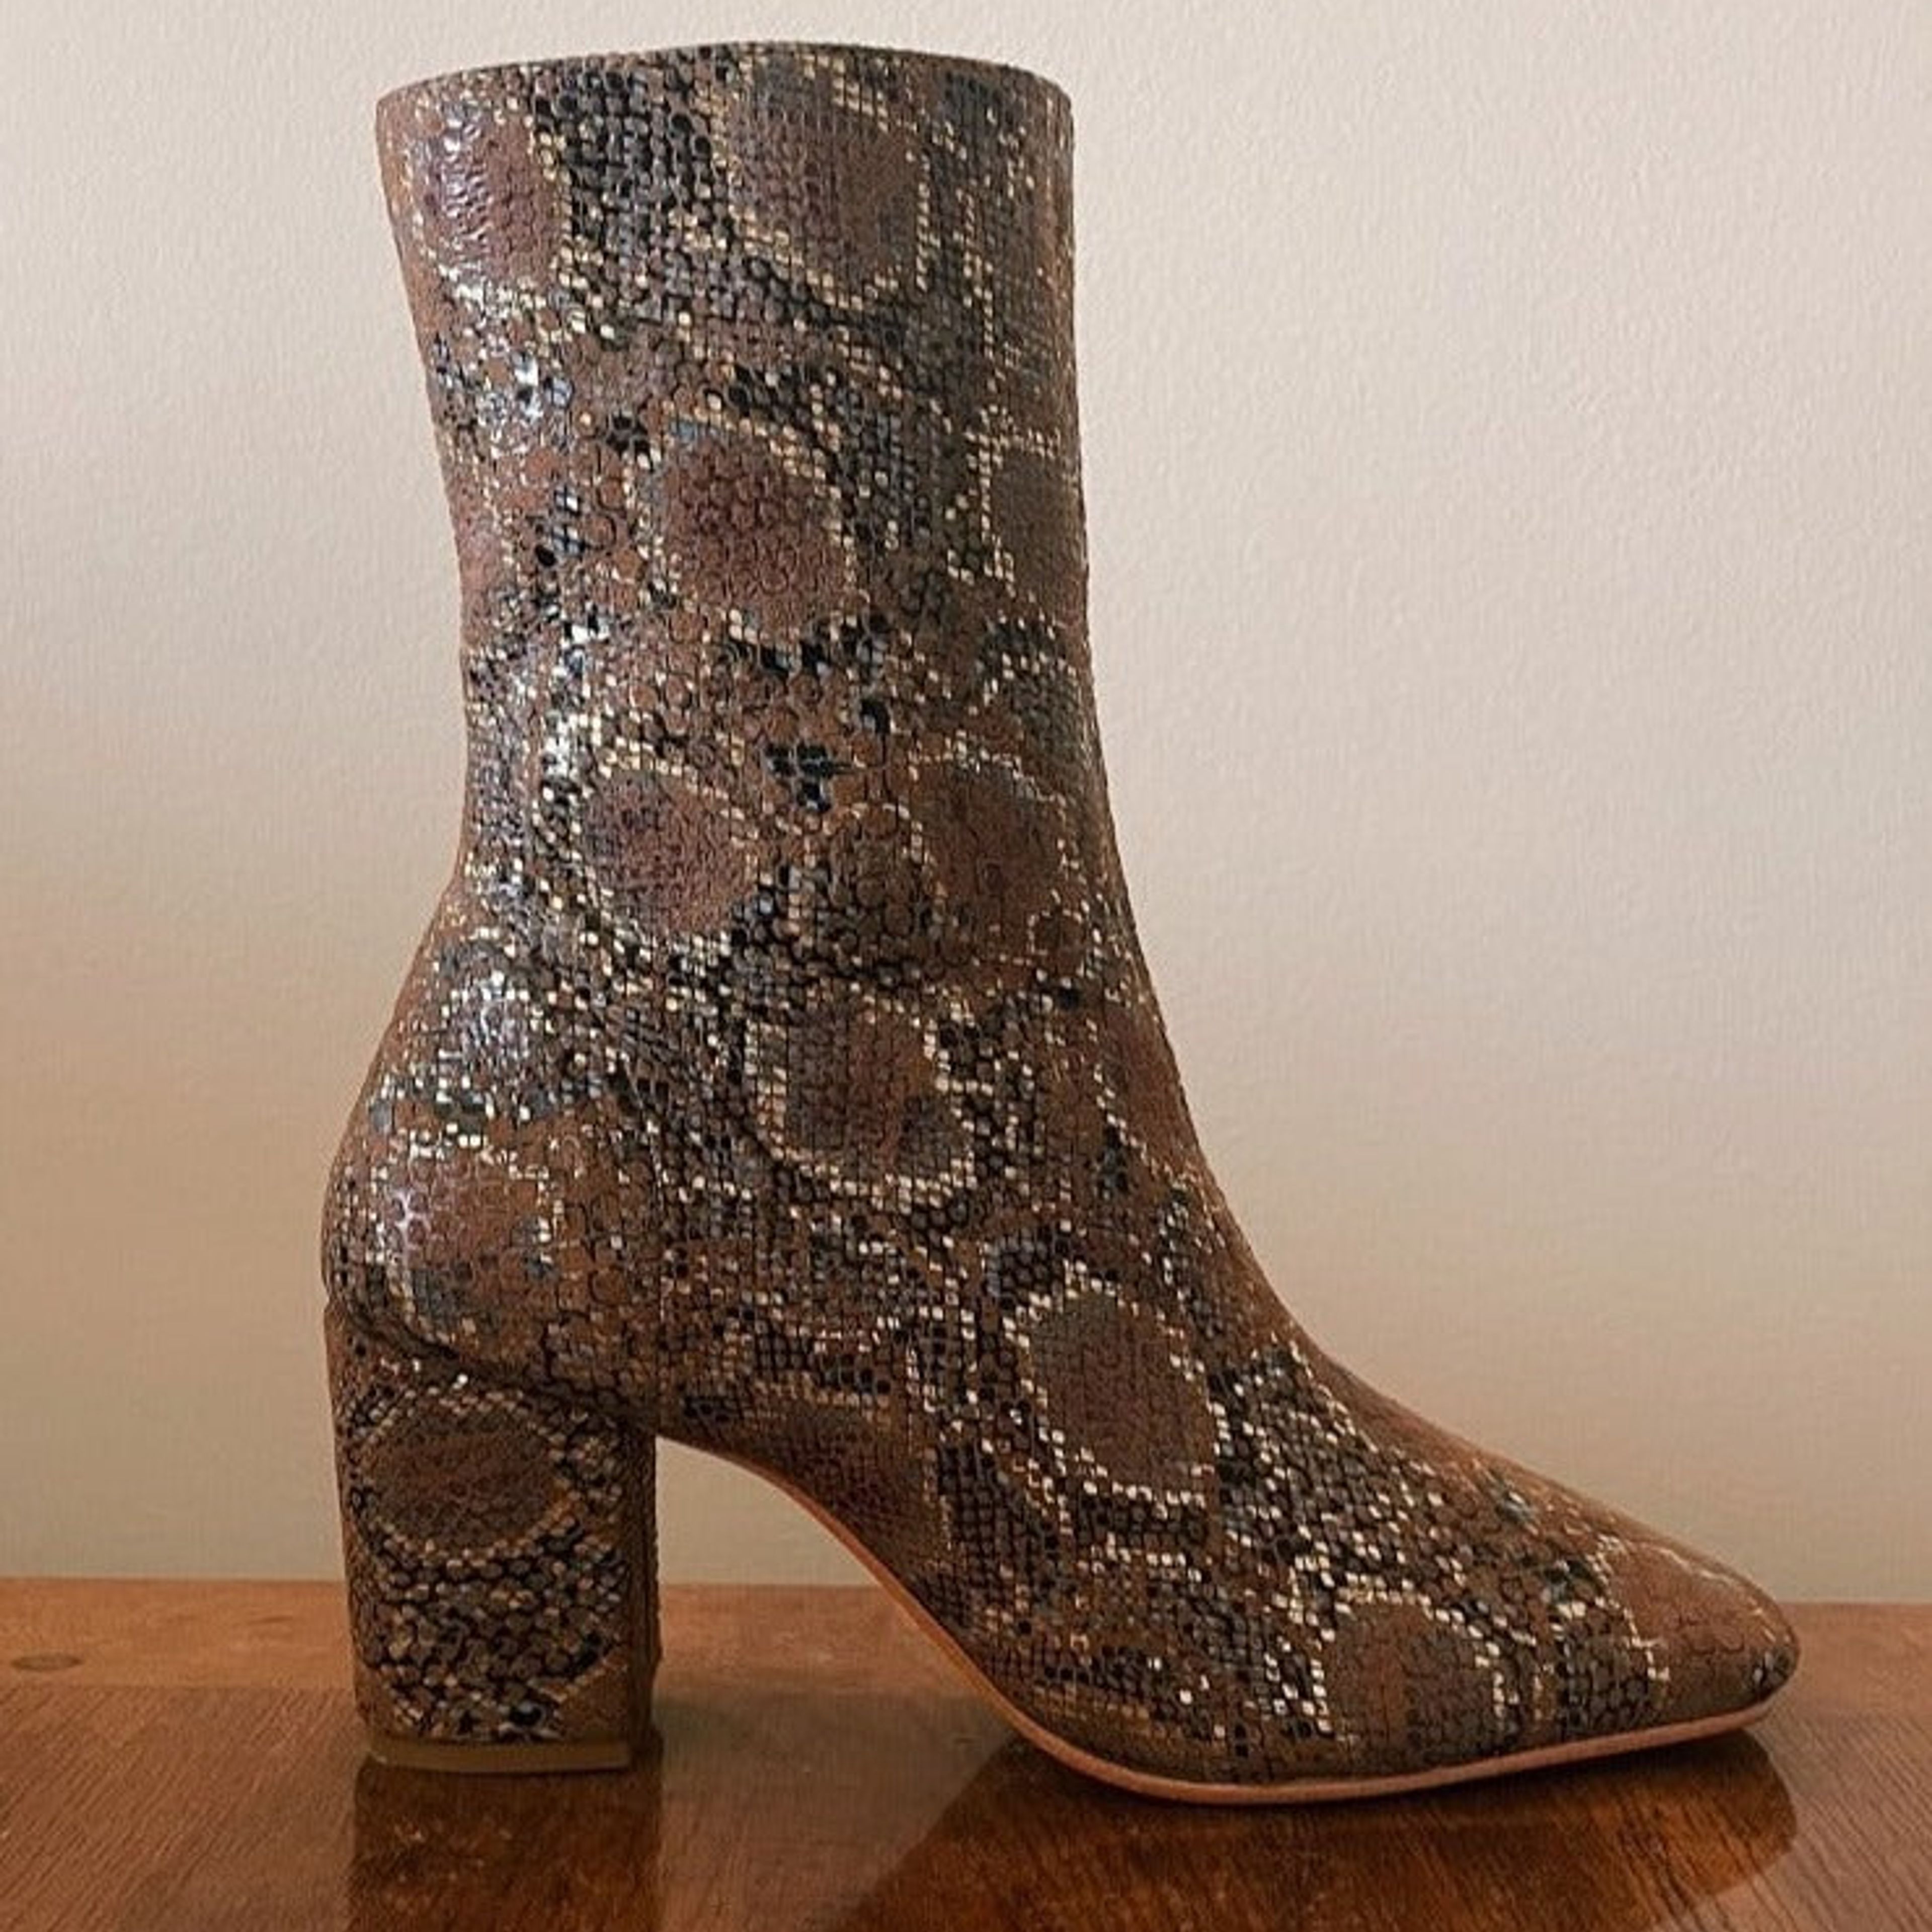 Modern Boot in Sueded Snake